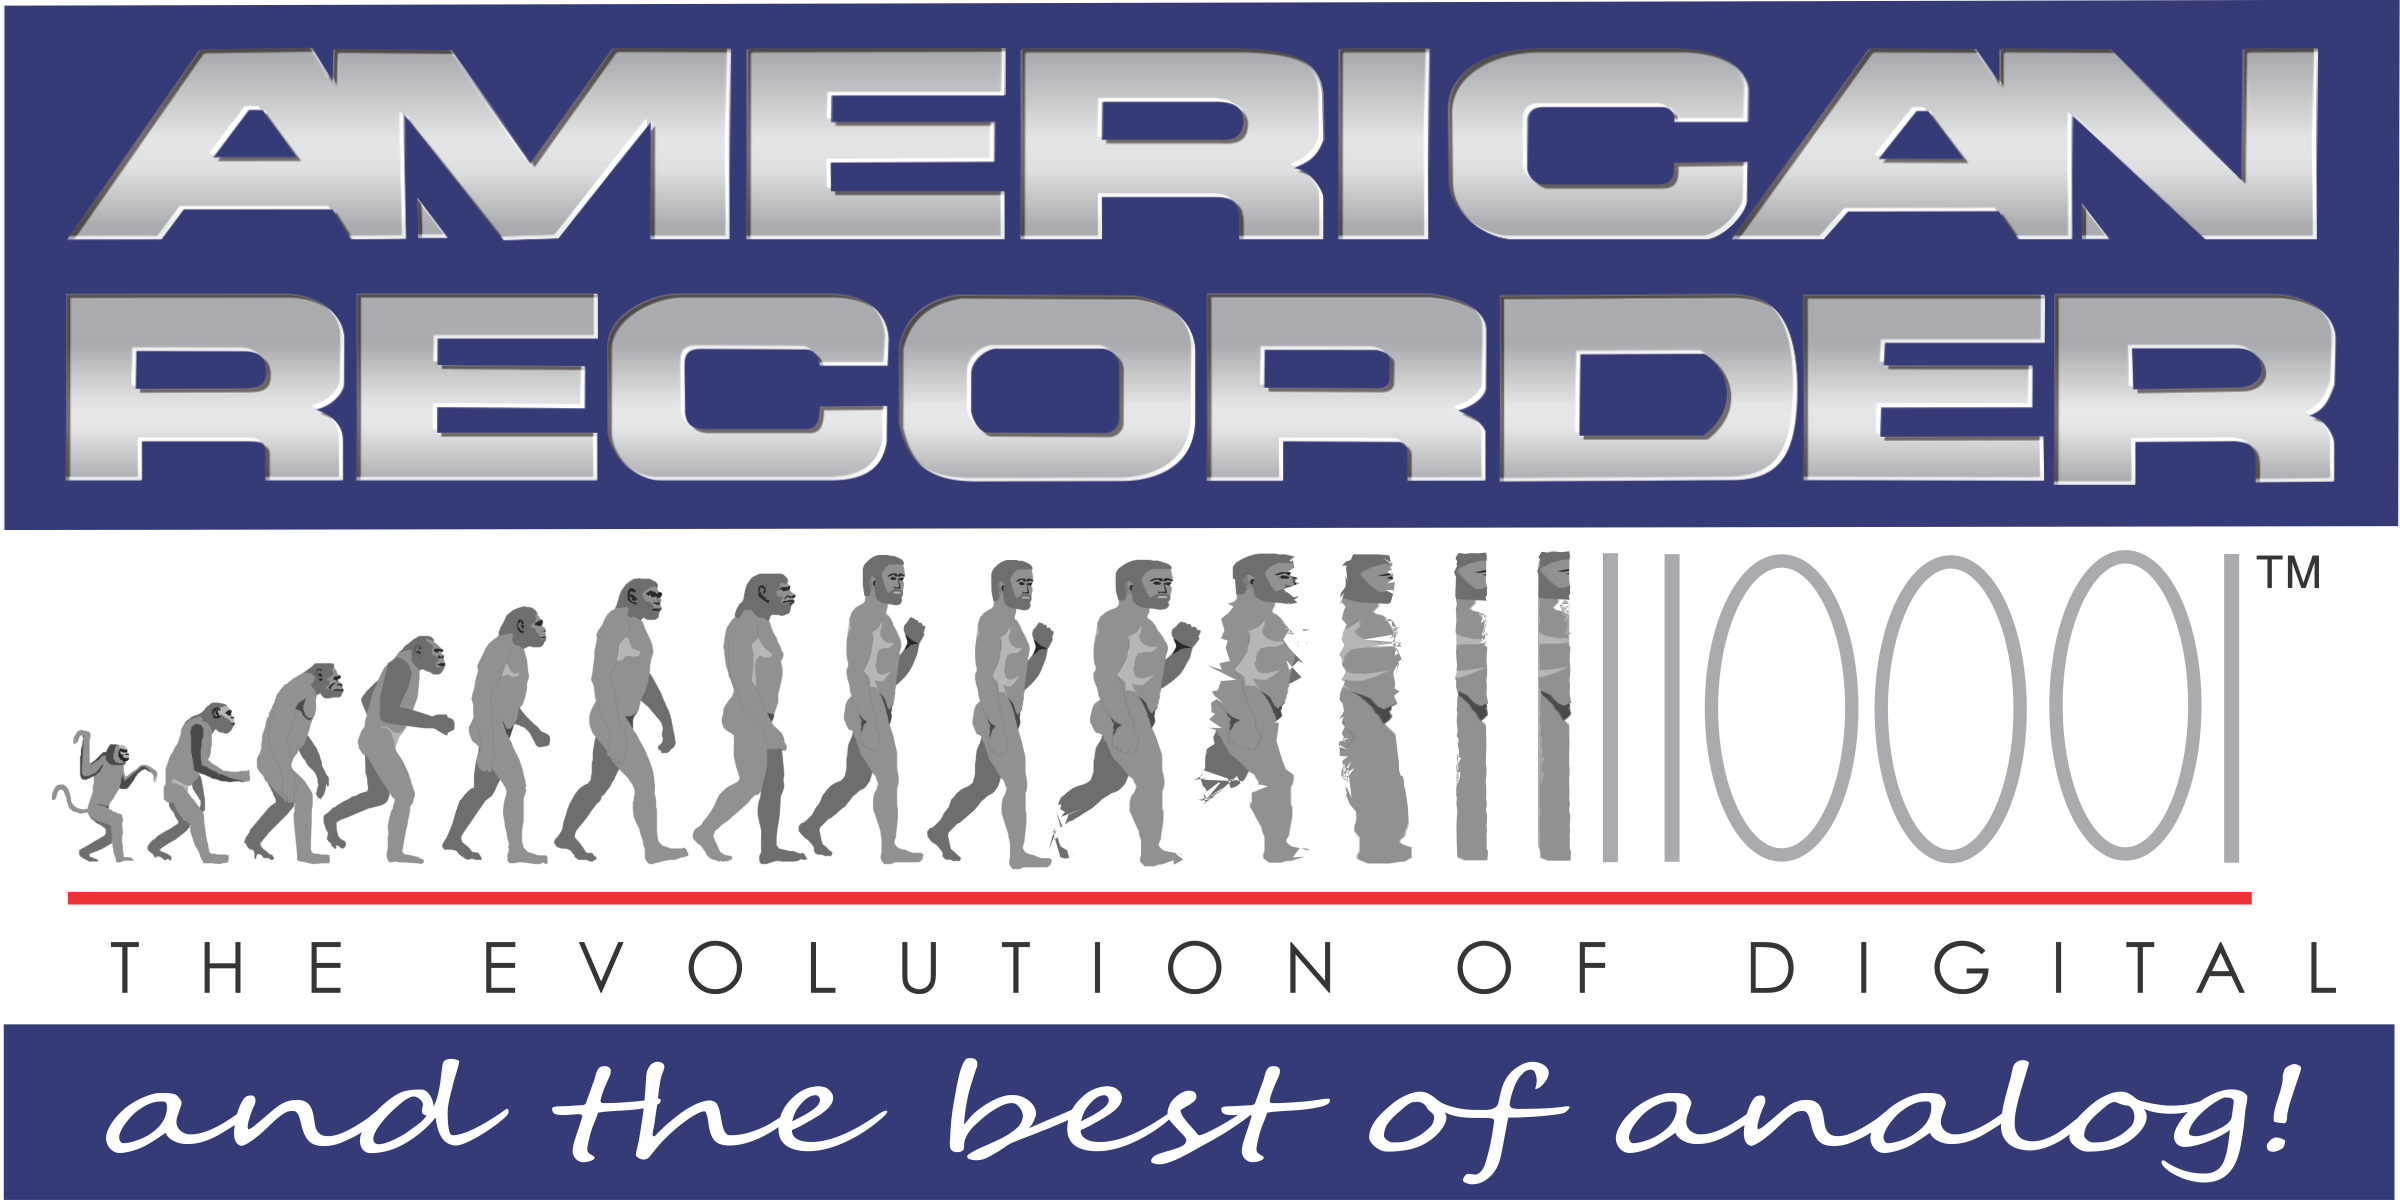 AMERICAN RECORDER TECHNOLOGIES, INC. Coupon Codes